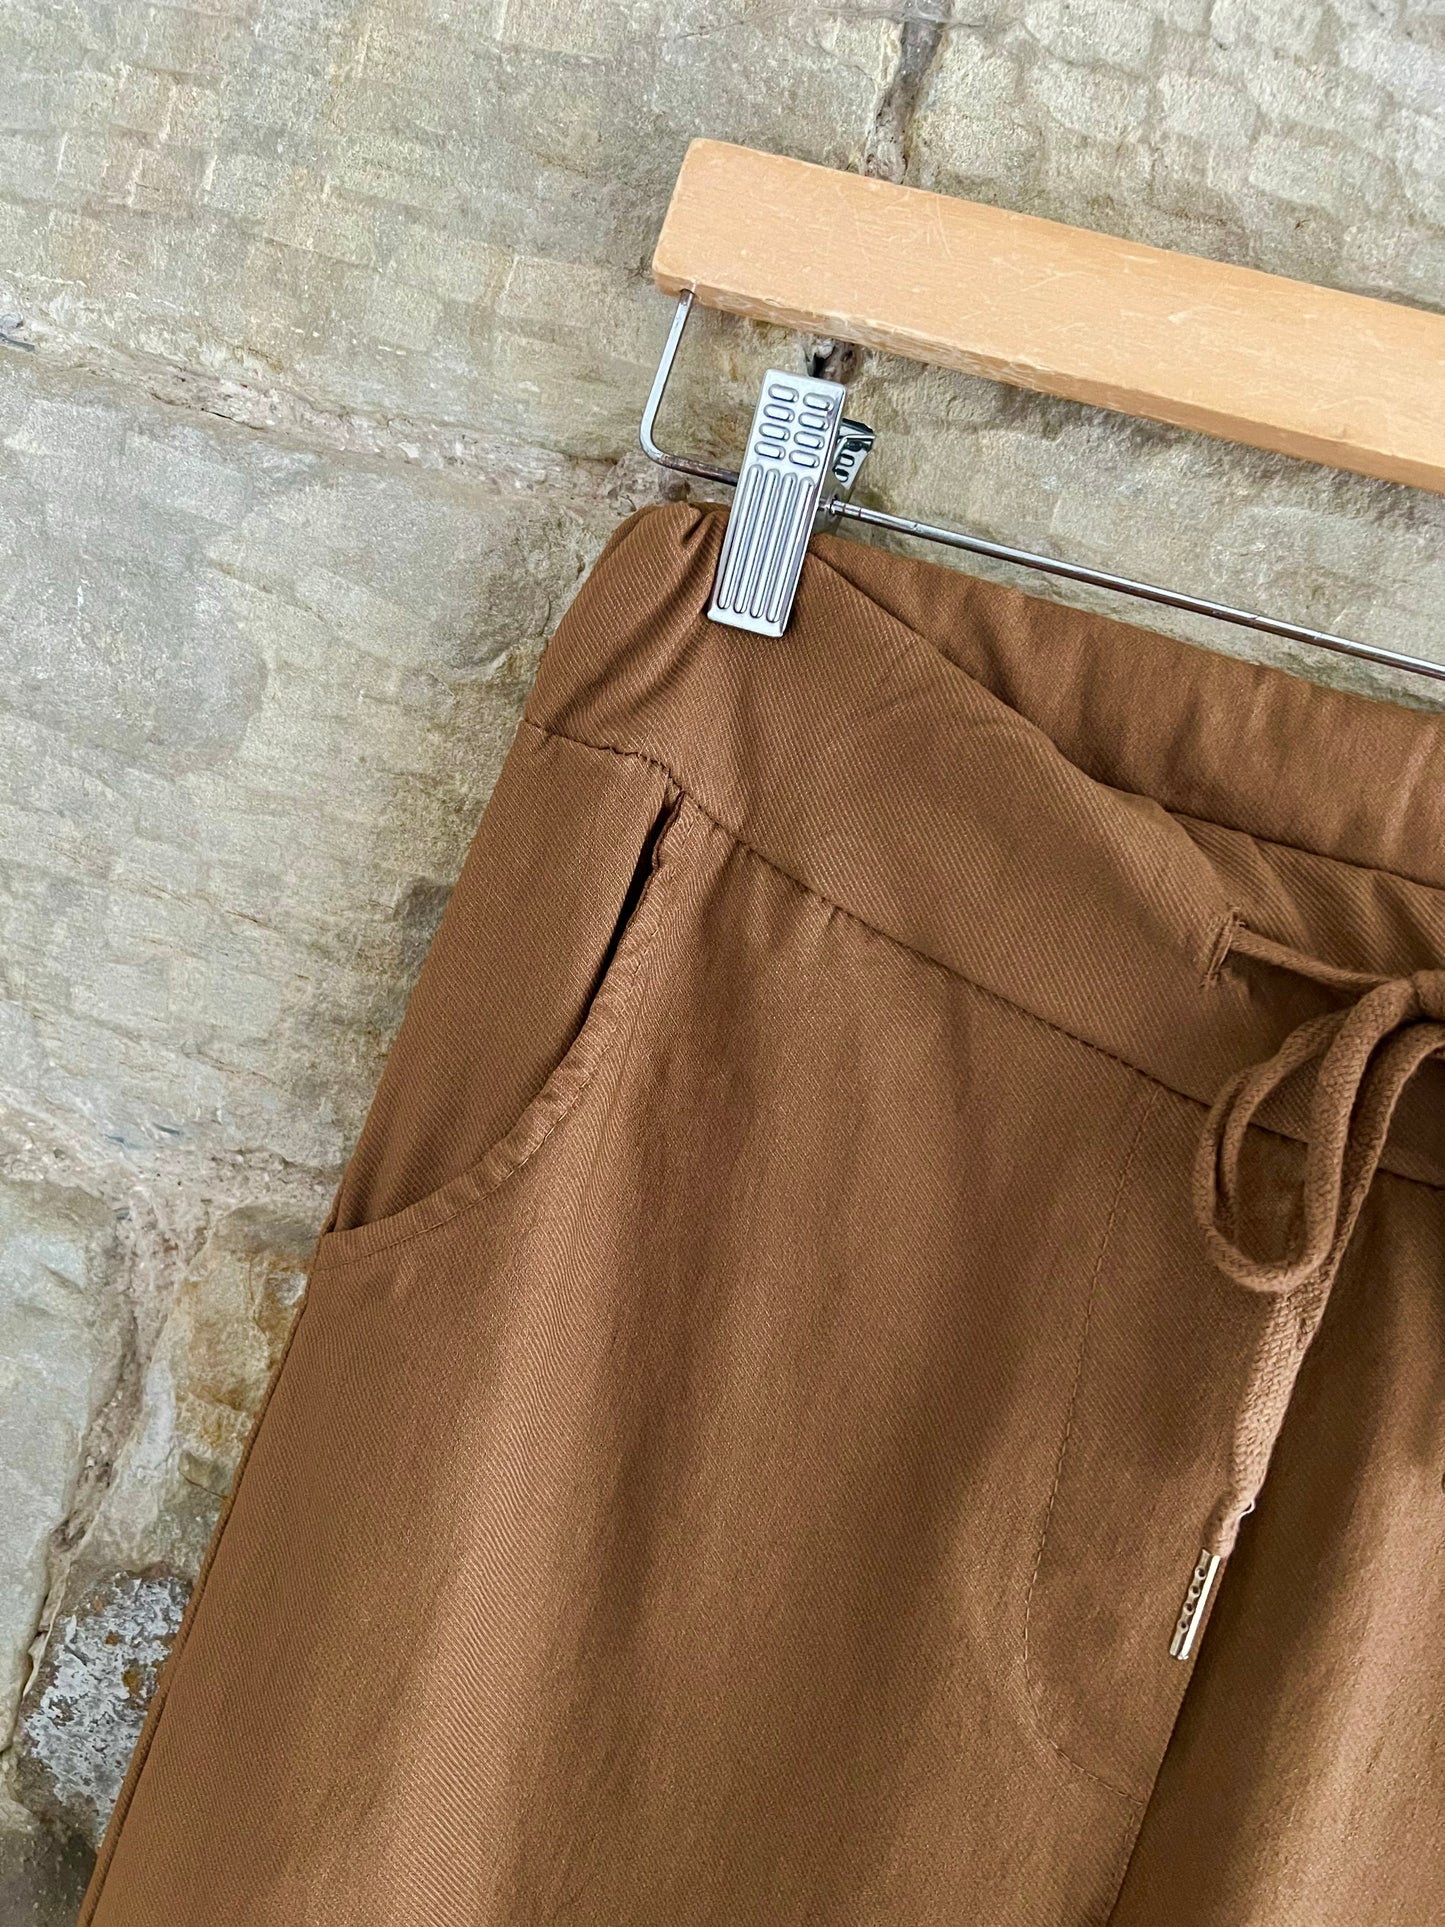 SMOOTH Magic Trousers - WRINKLE FREE - 2 Sizes - Tan